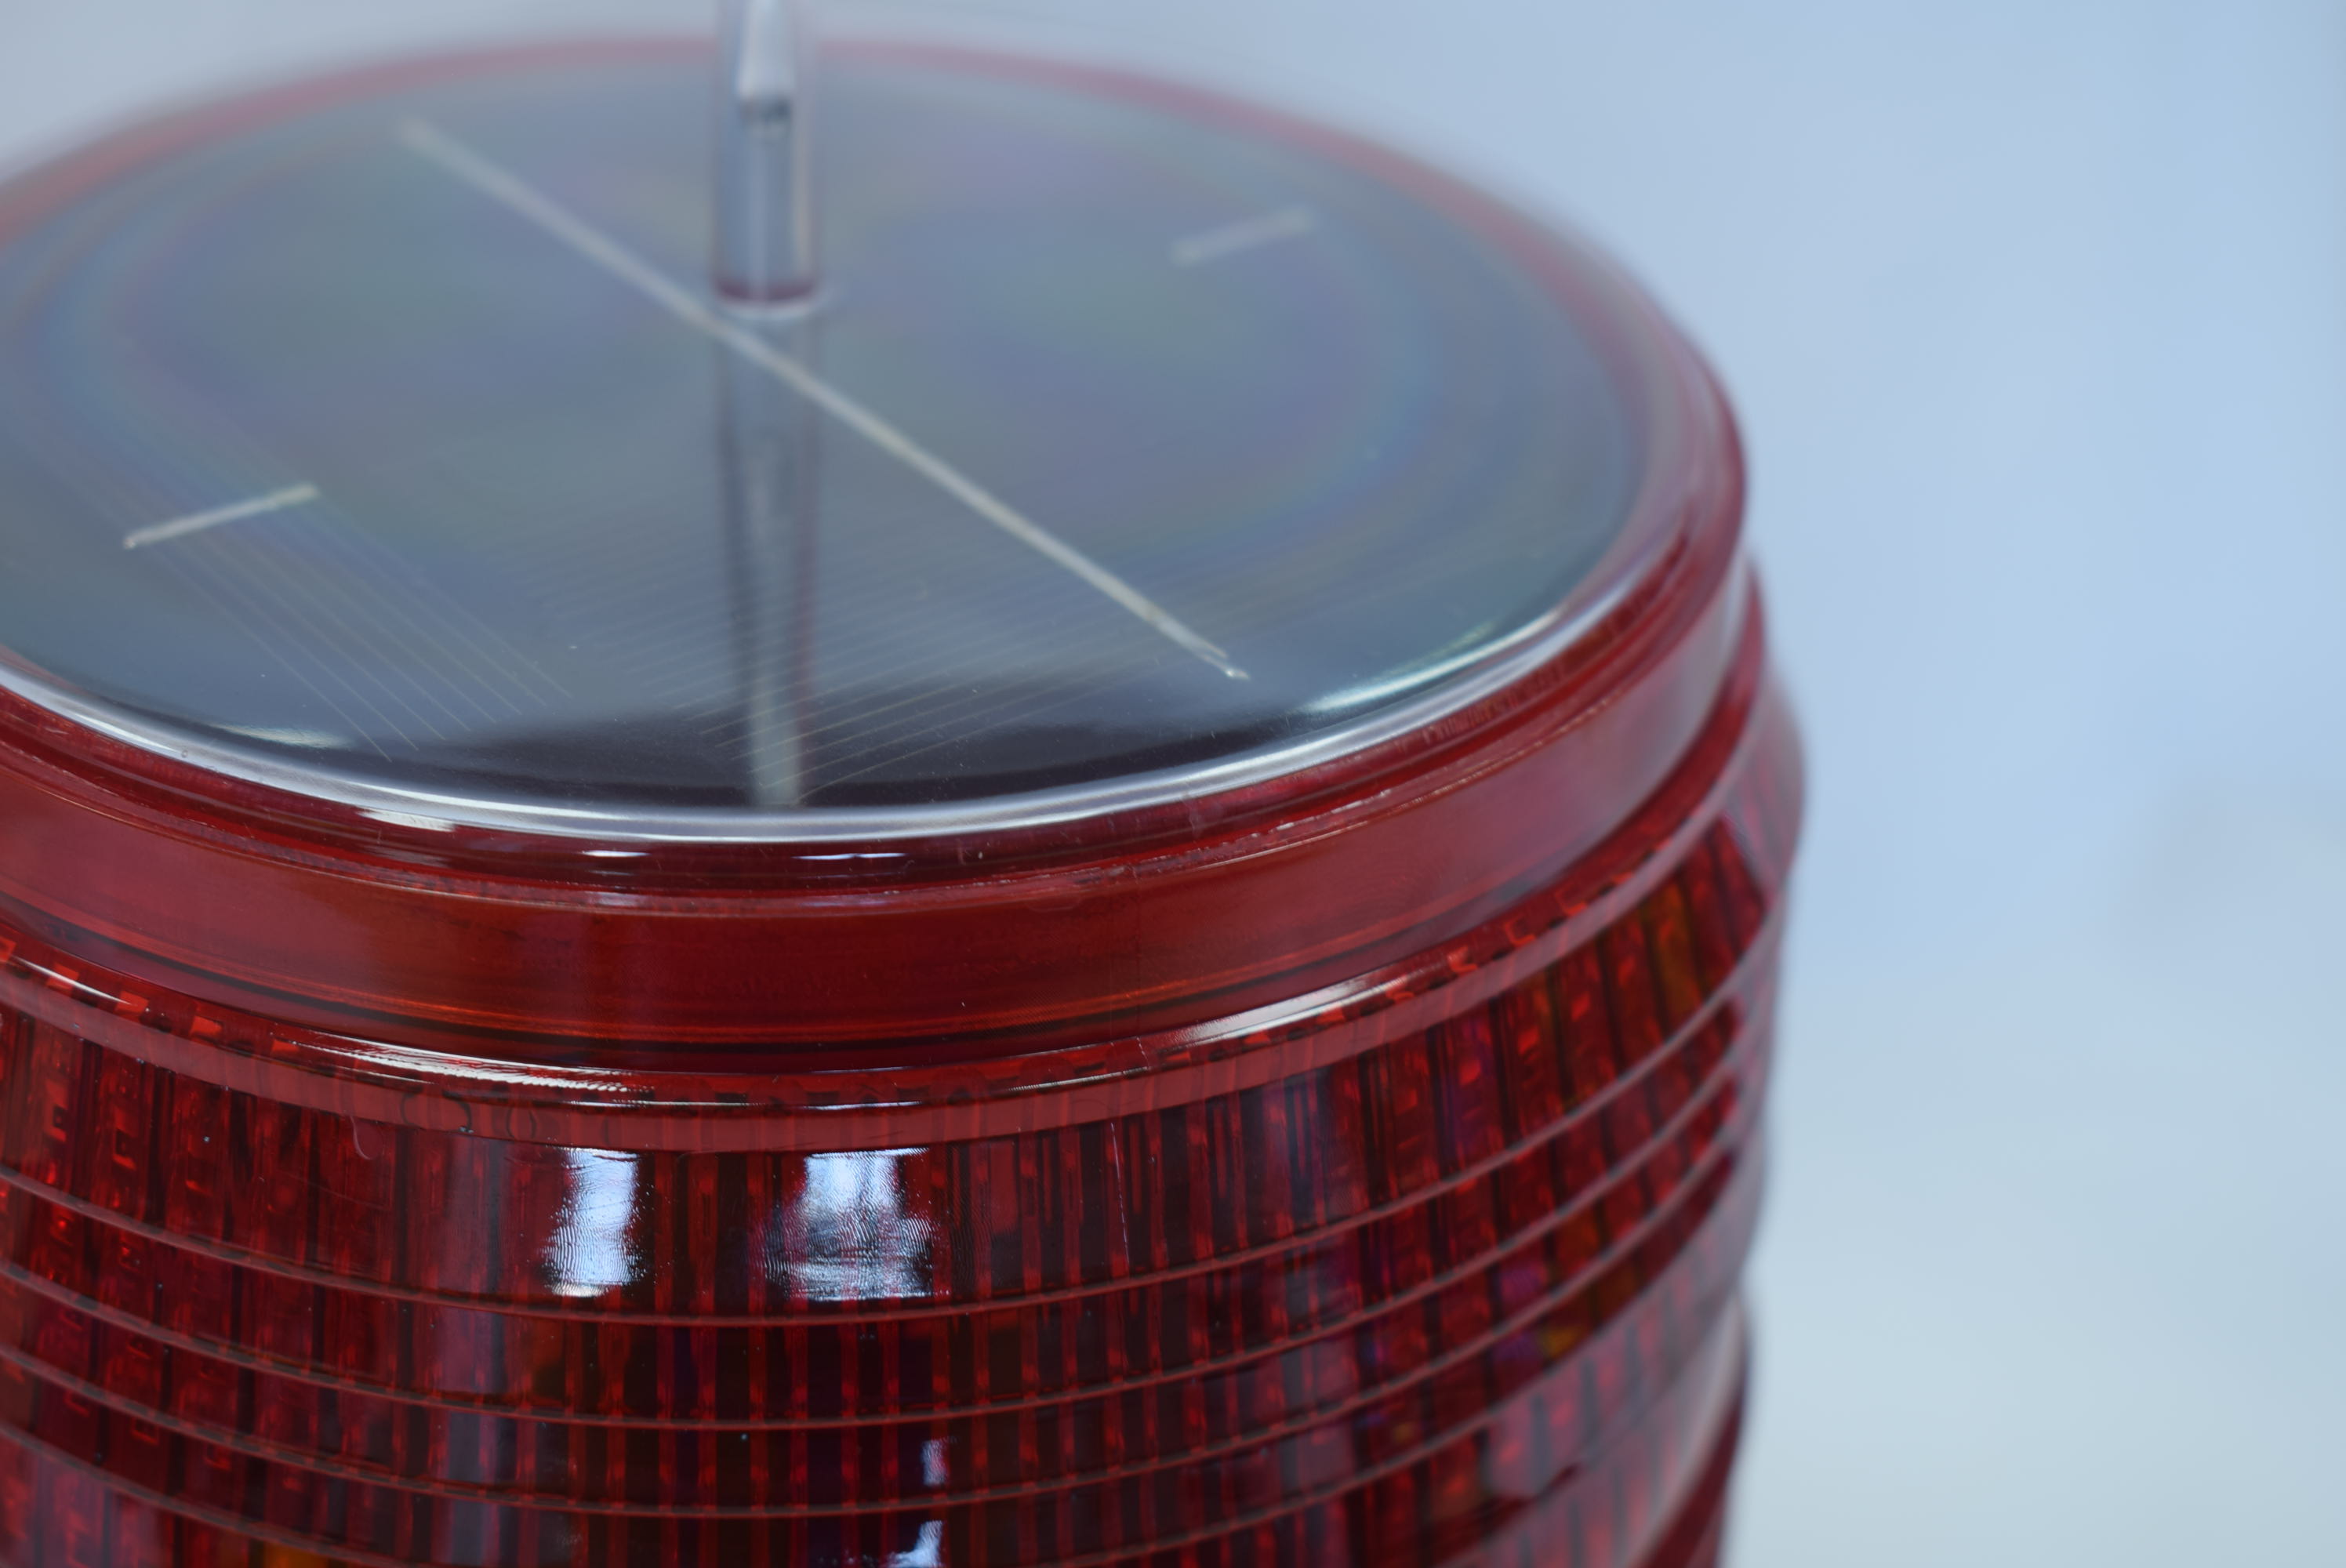 DK LED Outdoor Solar Powered Aviation Obstruction Light For Turbine Tower